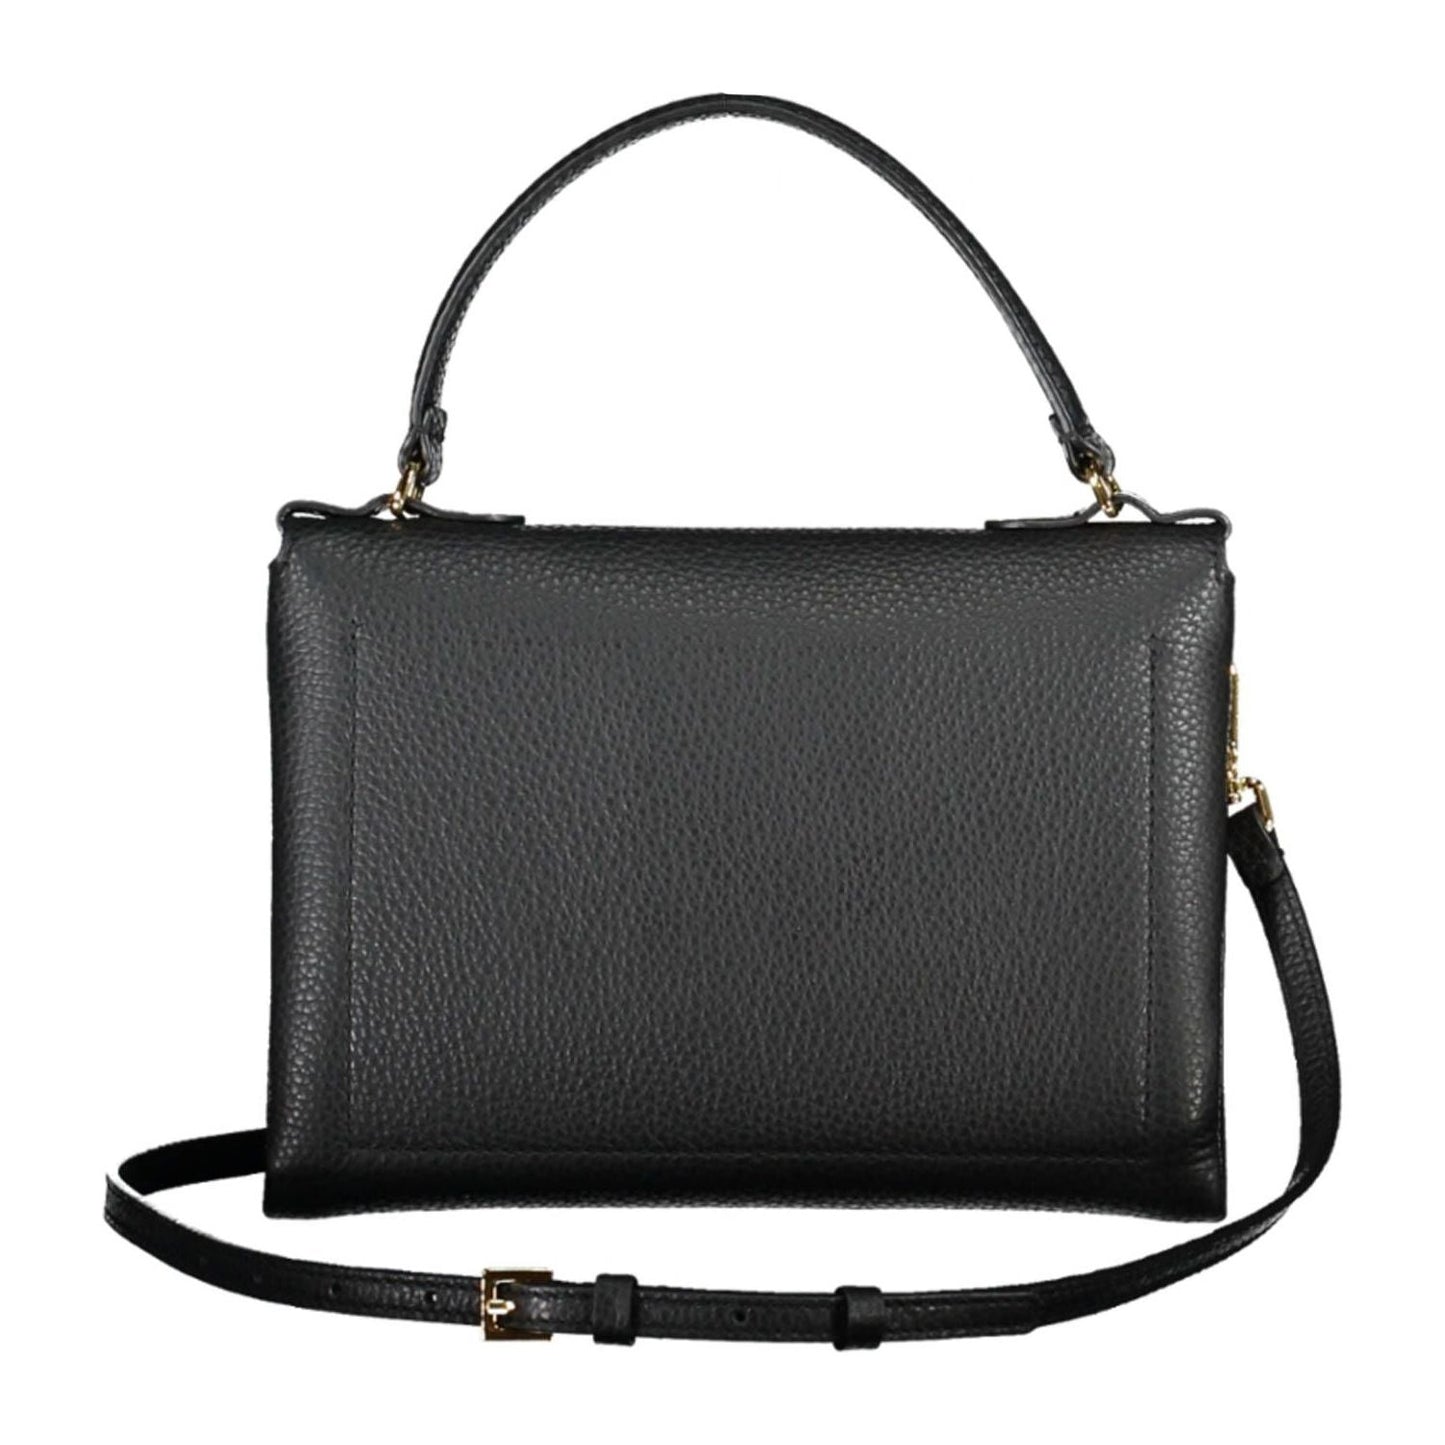 Coccinelle Chic Black Leather Handbag with Twist Lock chic-black-leather-handbag-with-twist-lock